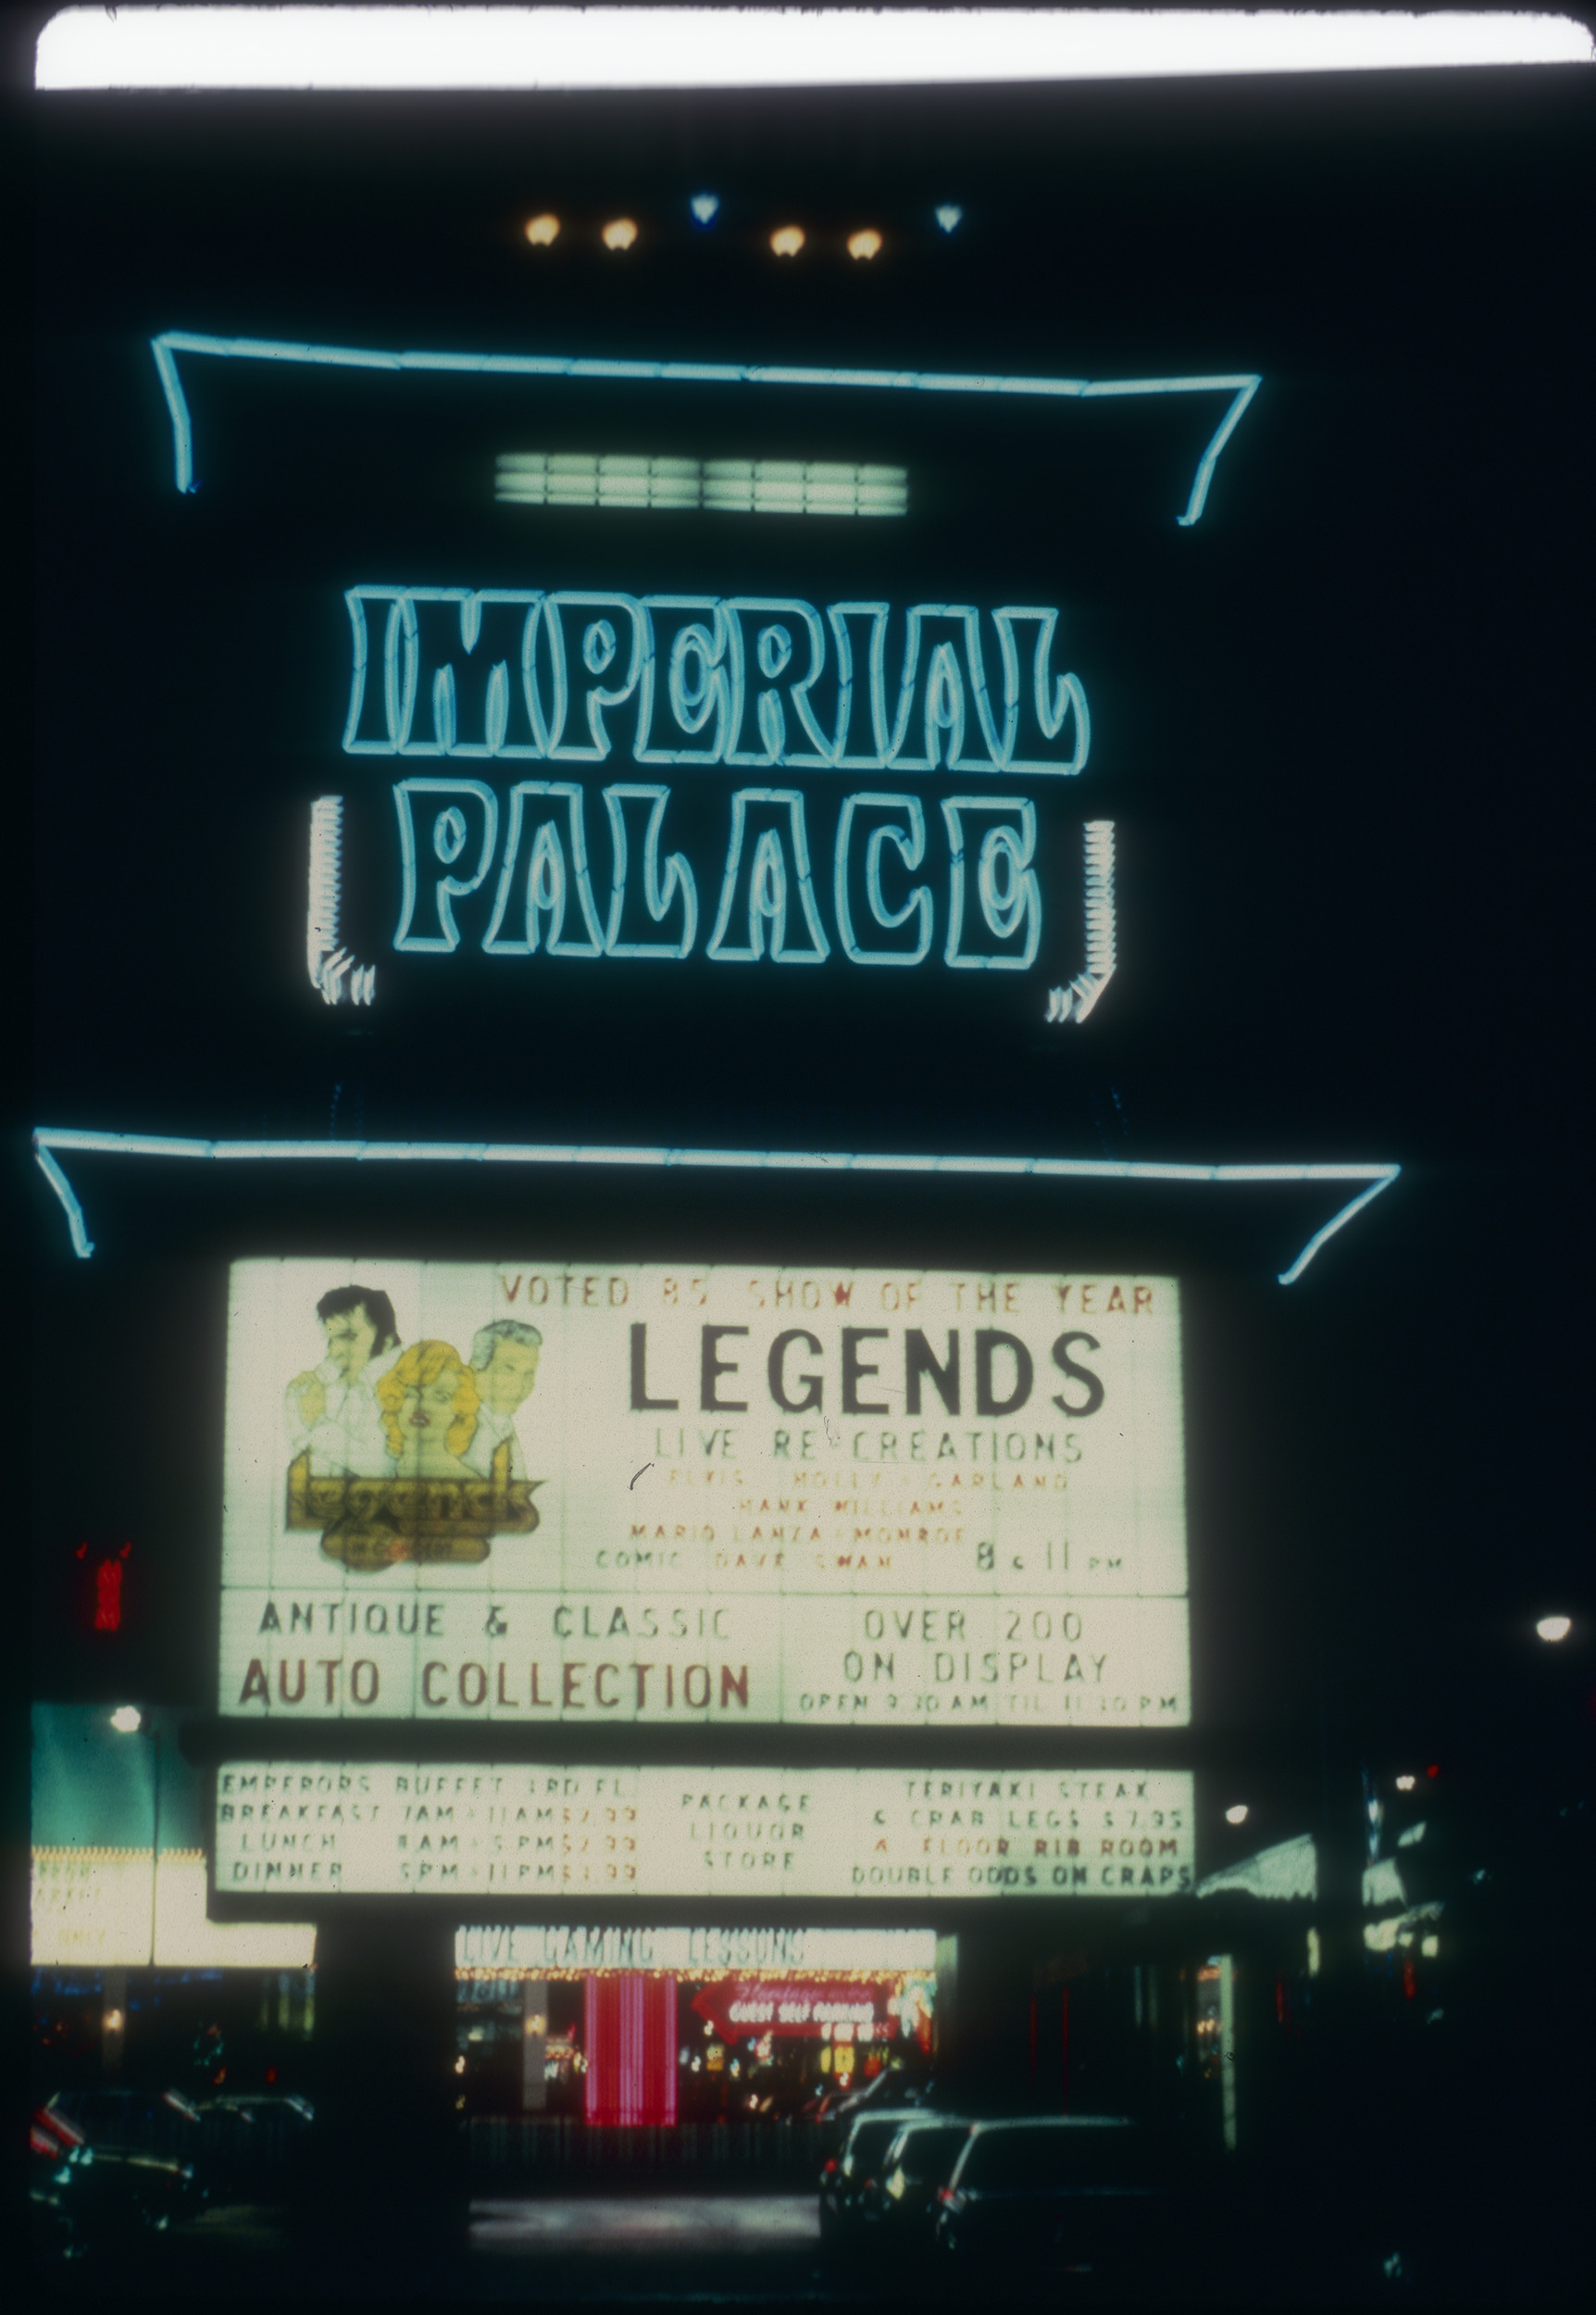 Slide of the Imperial Palace, Las Vegas, 1986